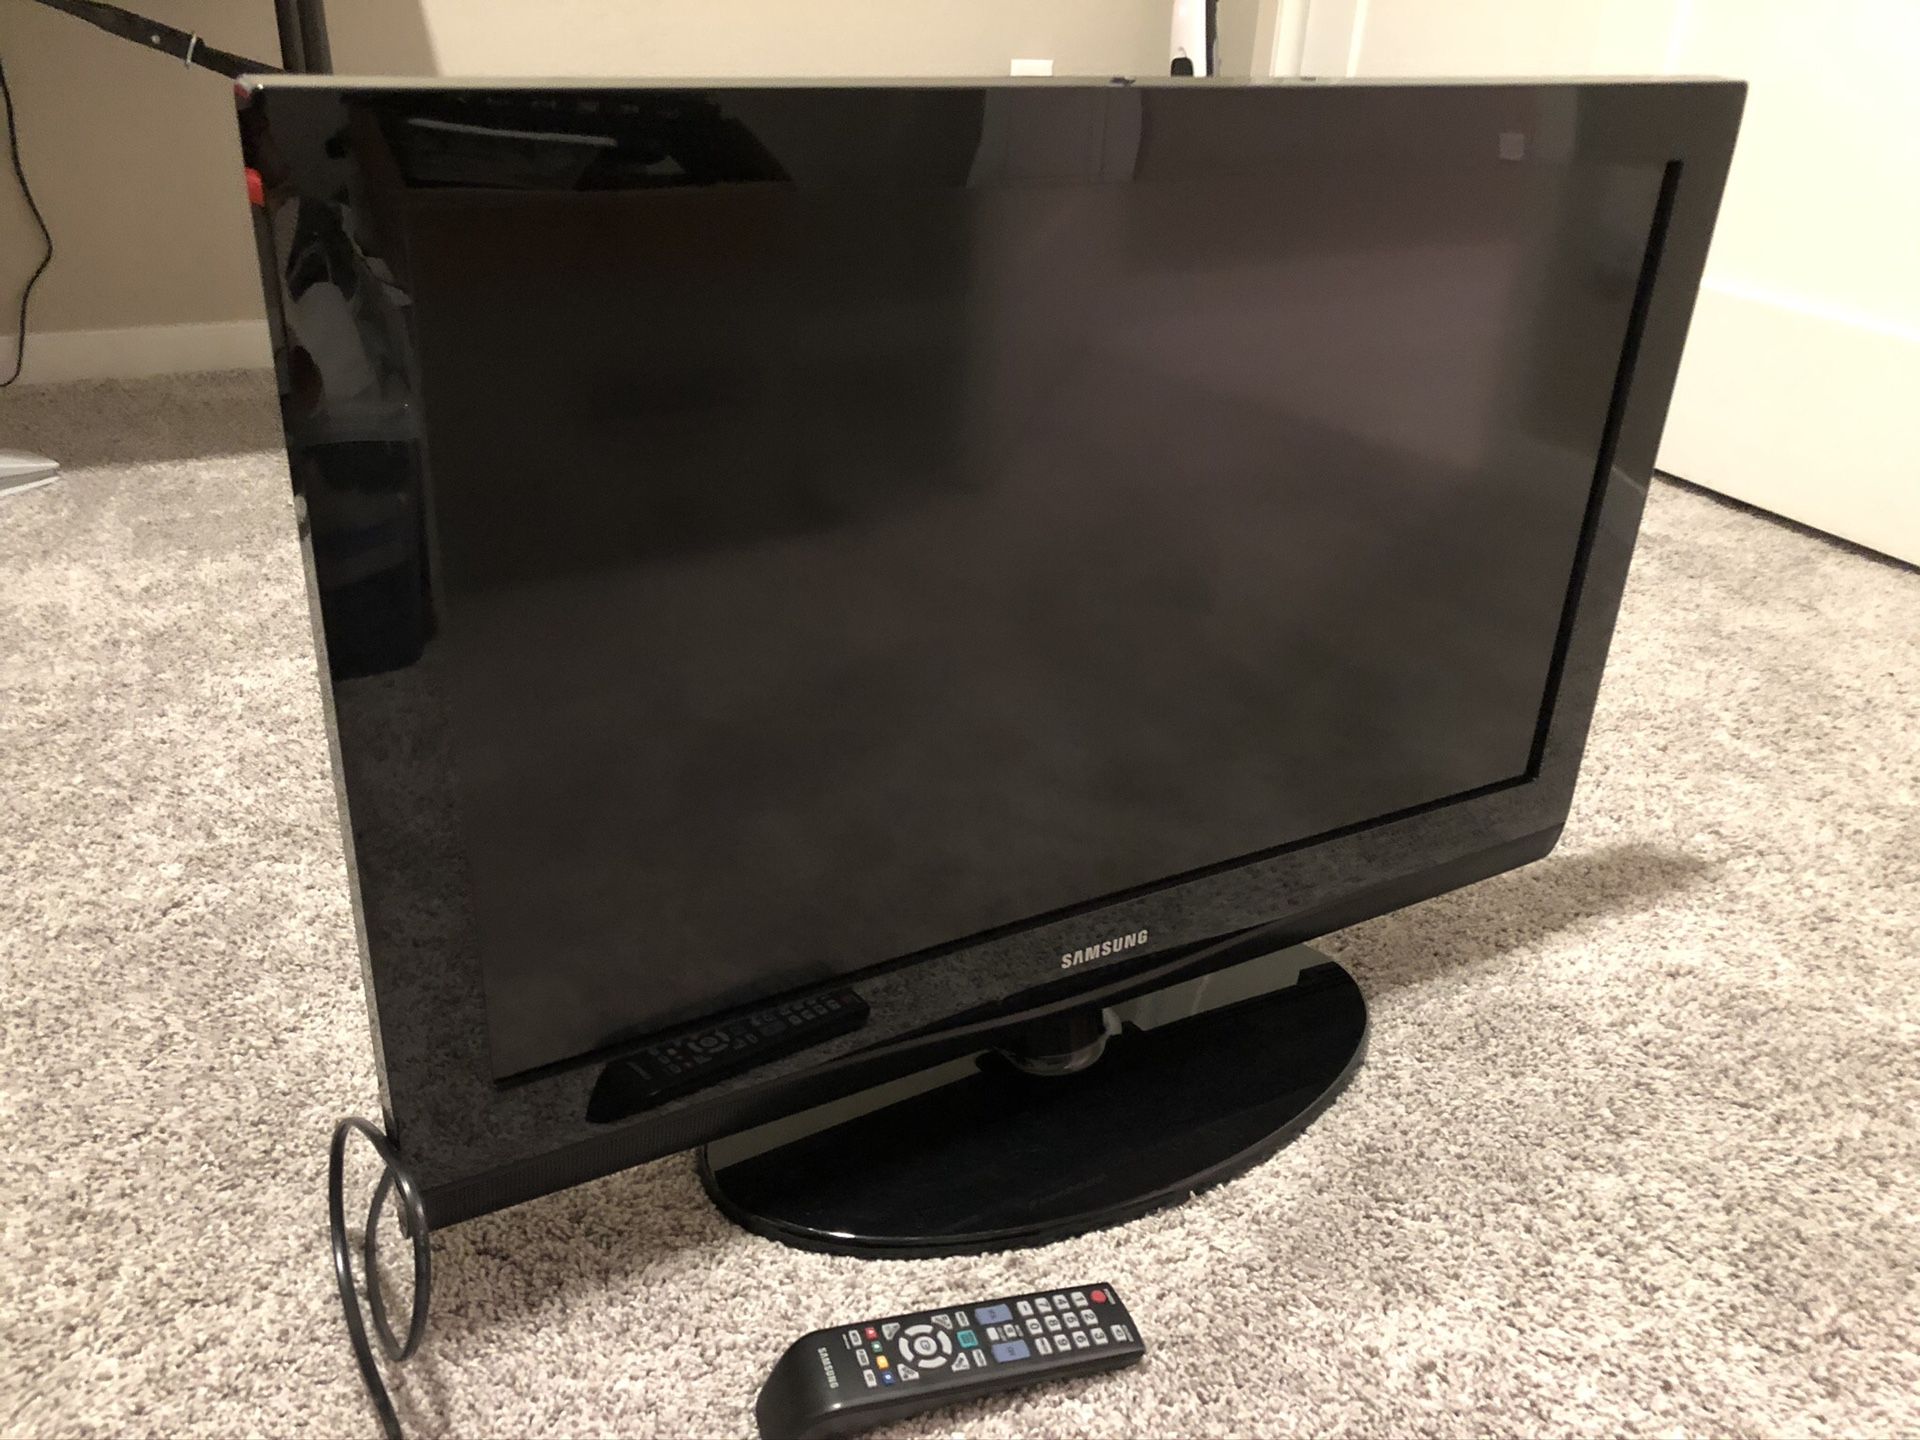 SAMSUNG 32 inch LCD TV - GREAT DEAL !!!